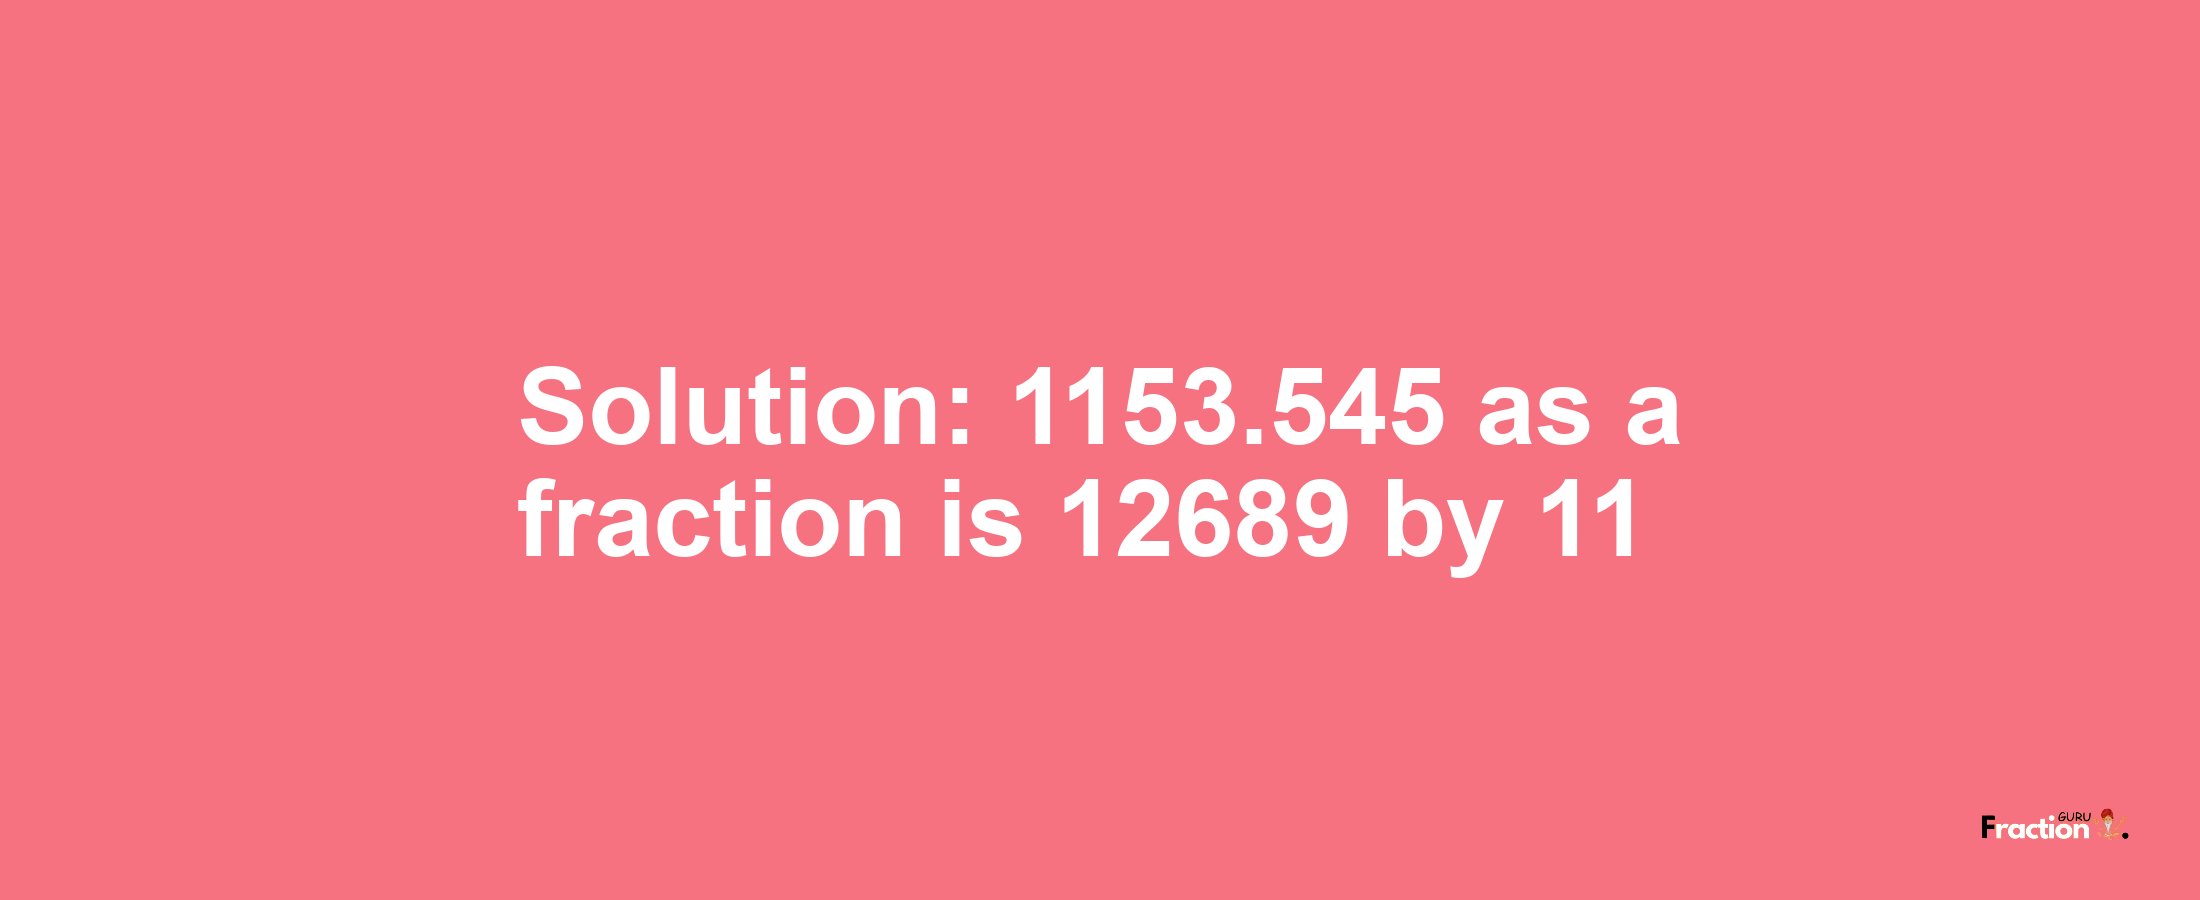 Solution:1153.545 as a fraction is 12689/11